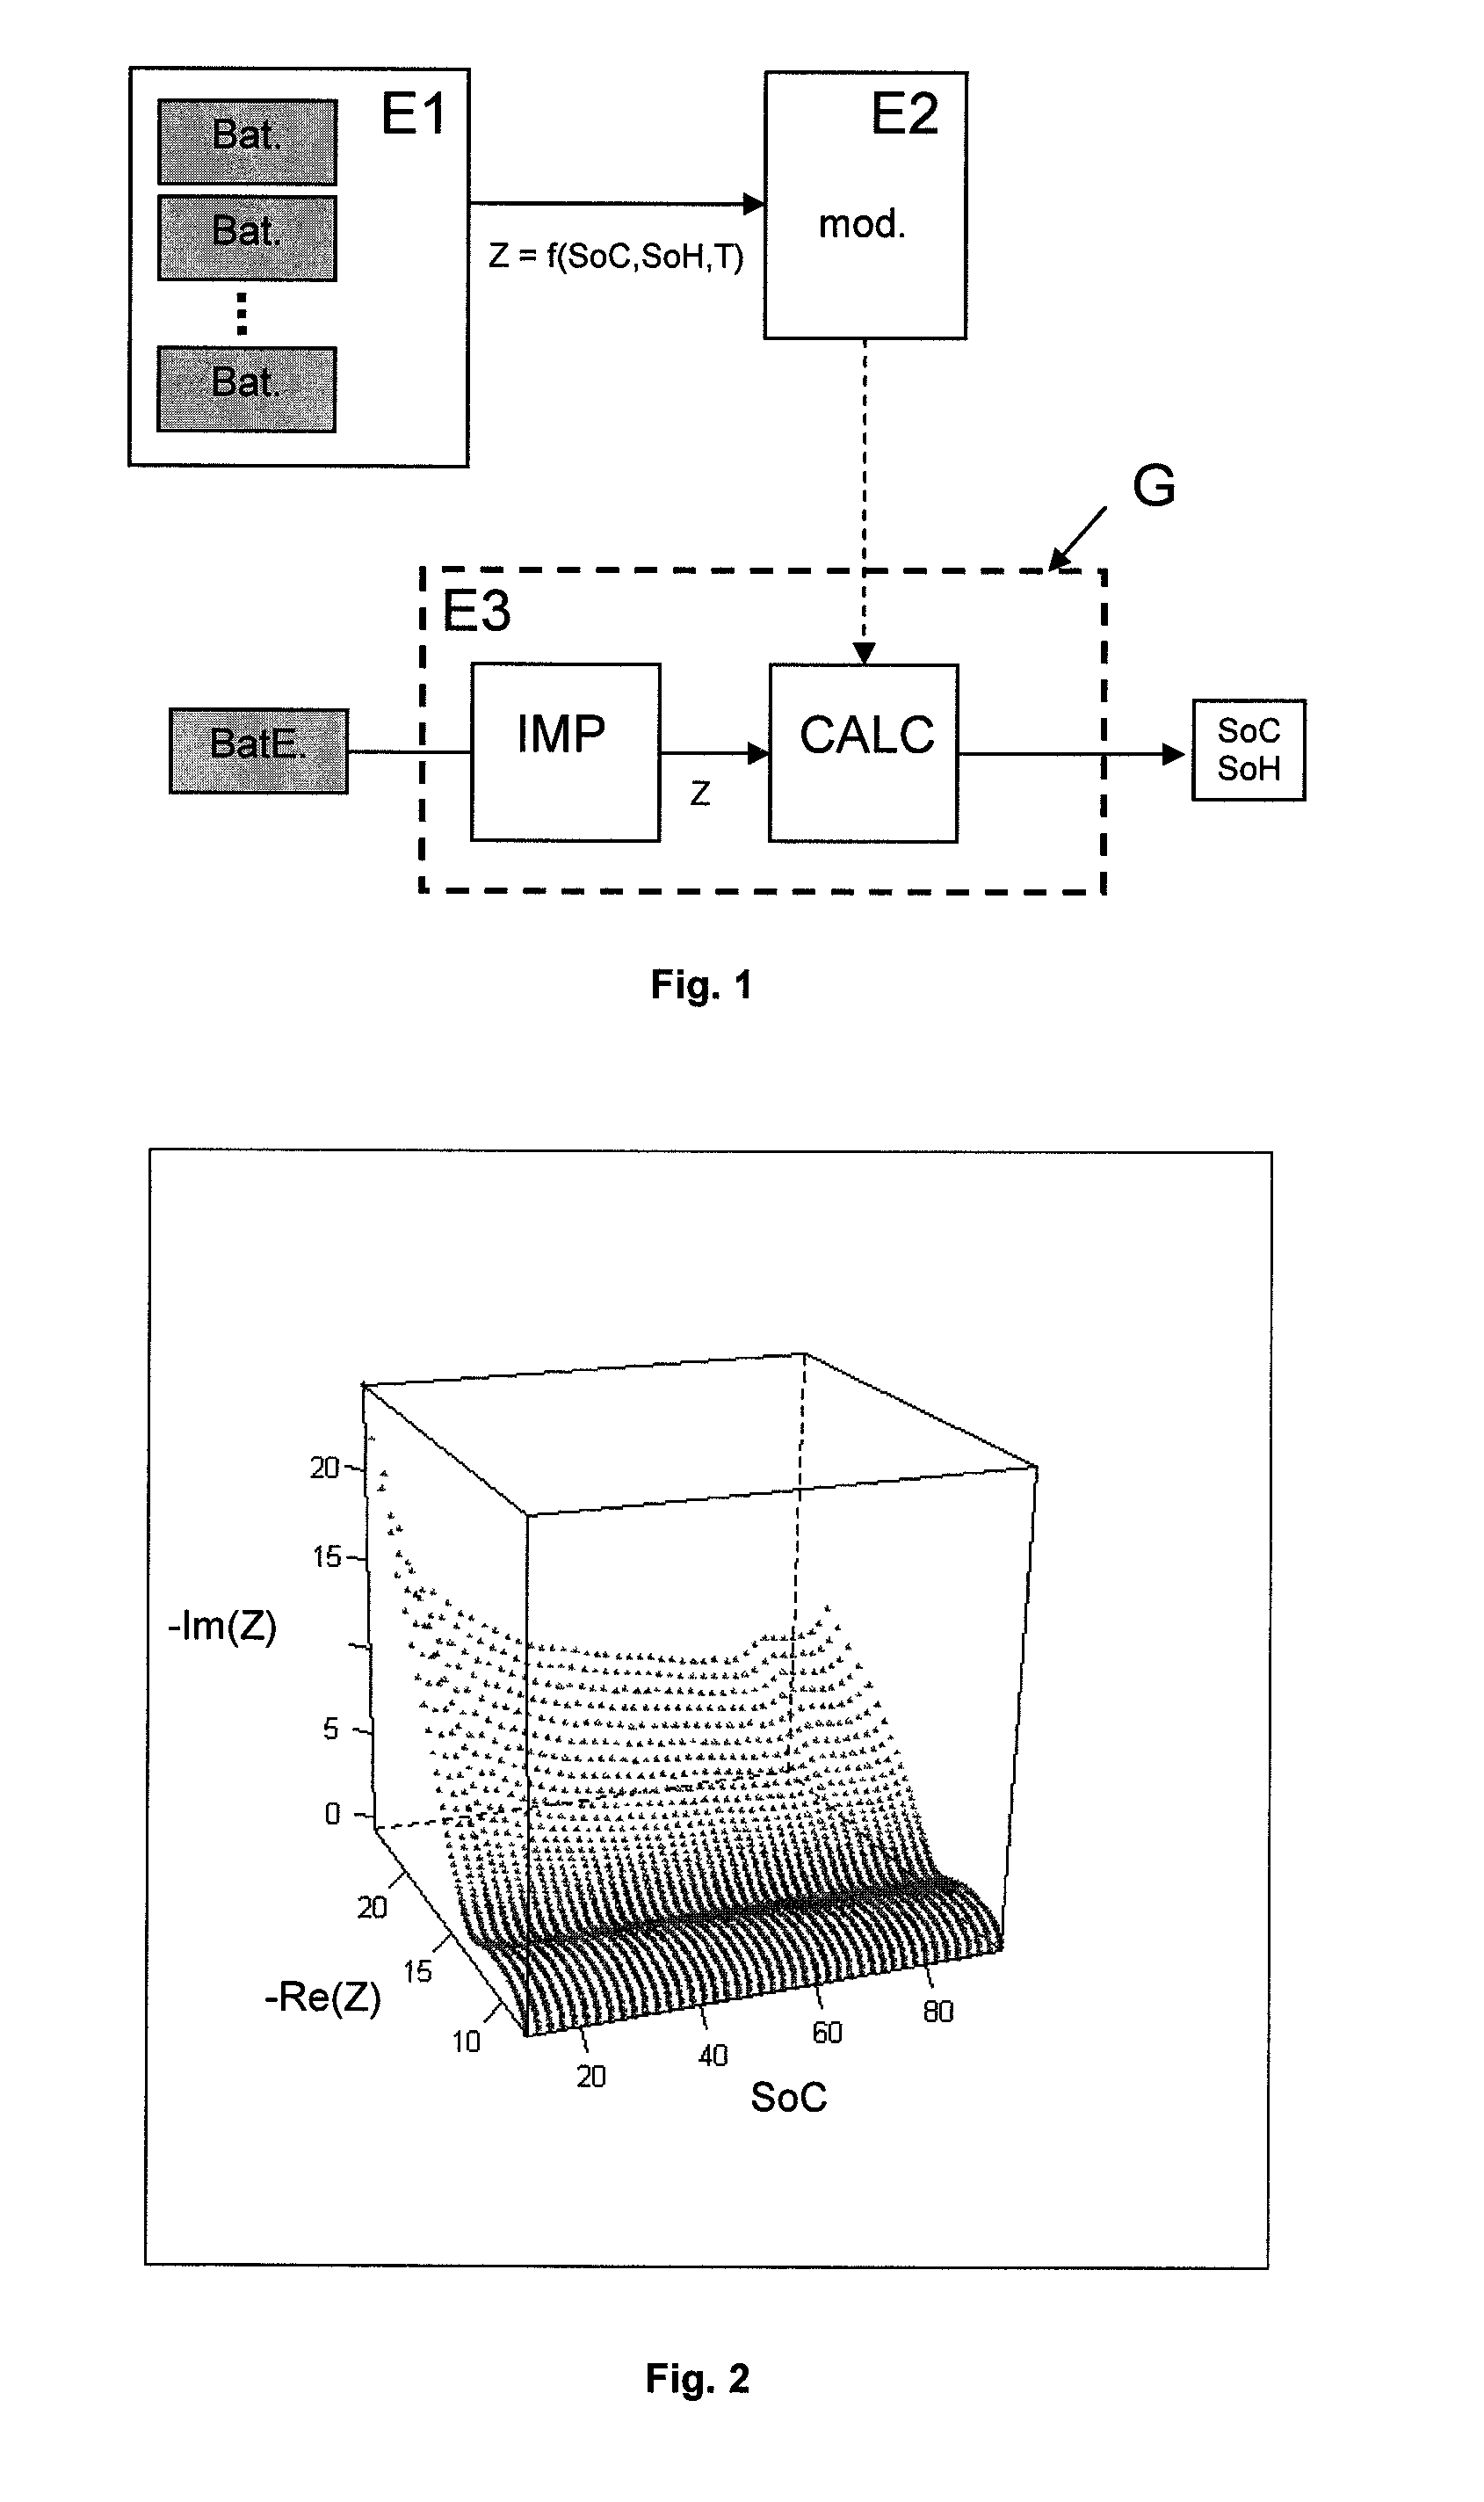 In-situ battery diagnosis method using electrochemical impedance spectroscopy